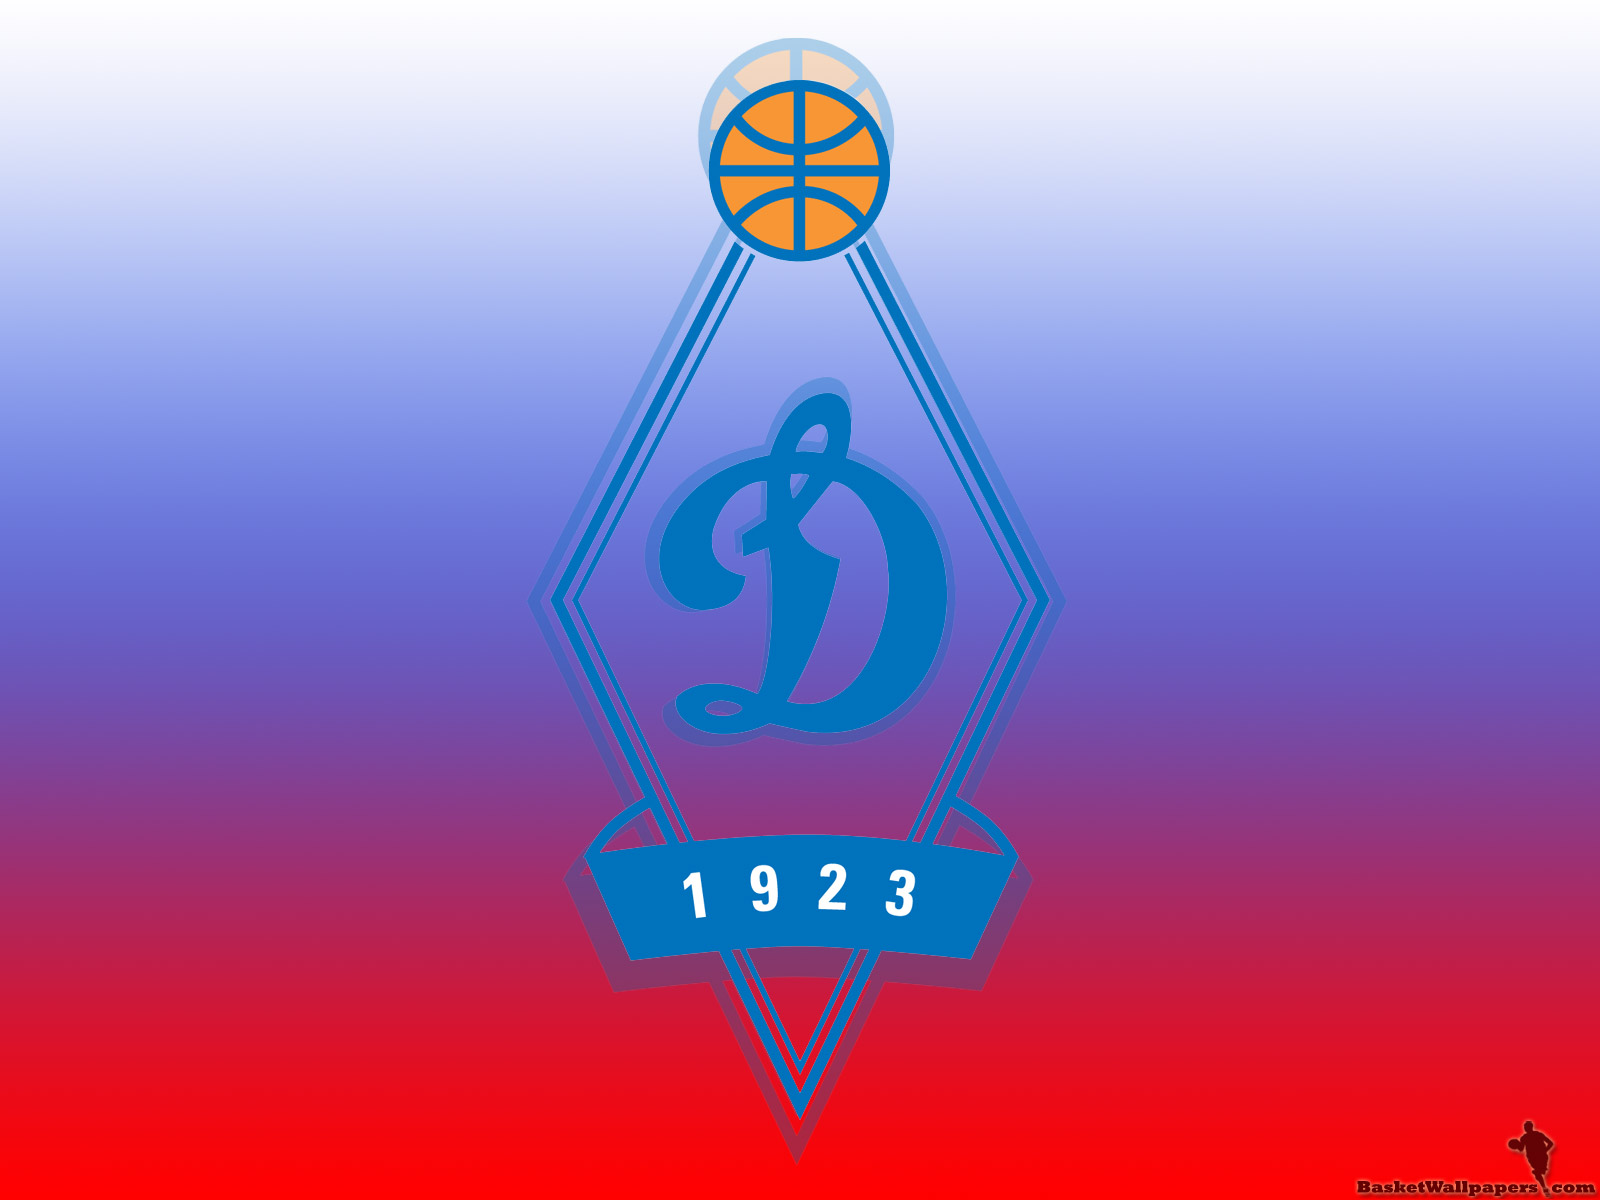 Here's wallpaper of the second best Russian basketball team in last 10-15 